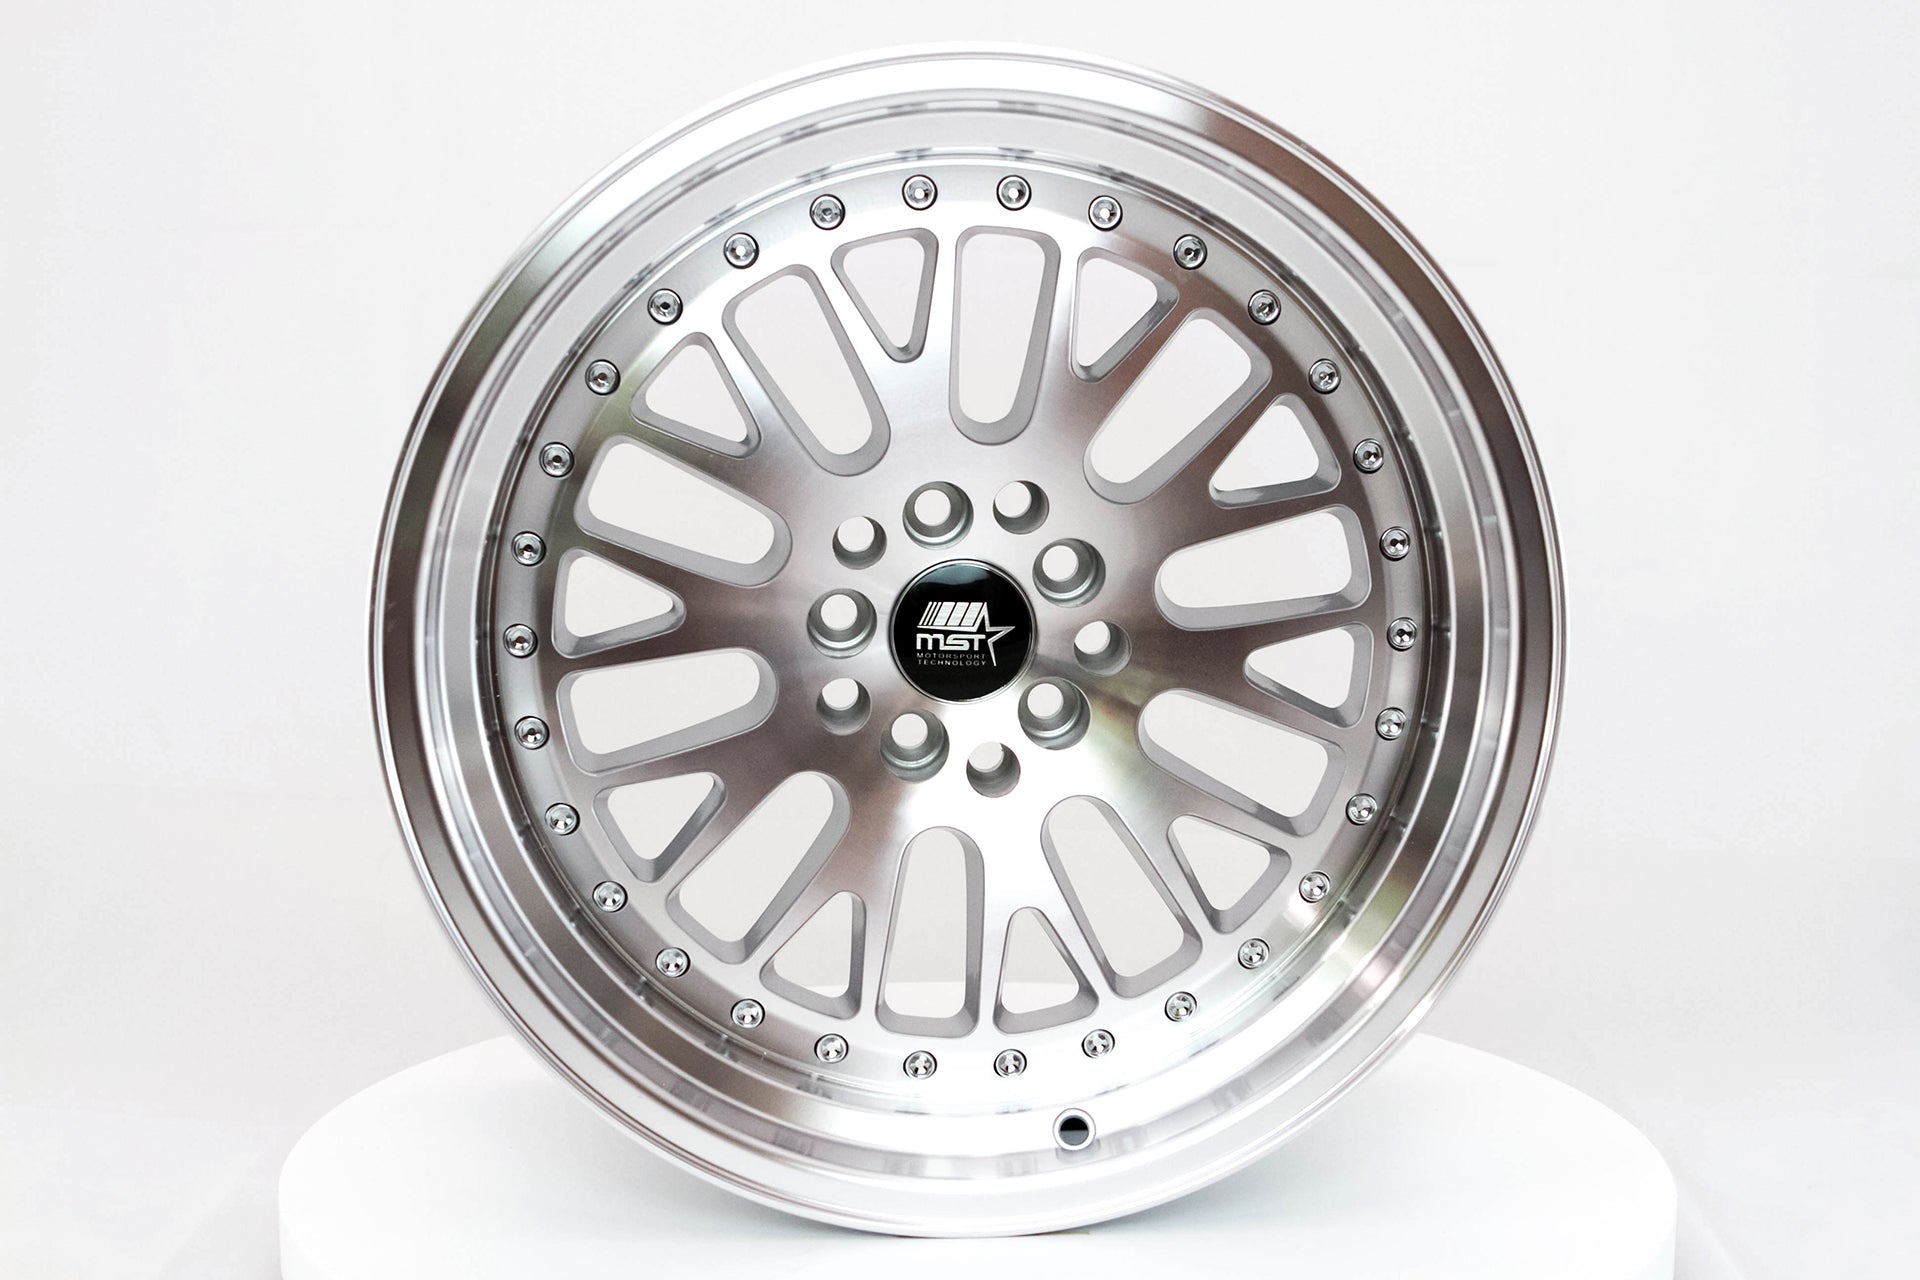 MST WHEELS MT10 - Silver w/Machined Face - 17x9.0 5x100/5x114.3 Offset +20